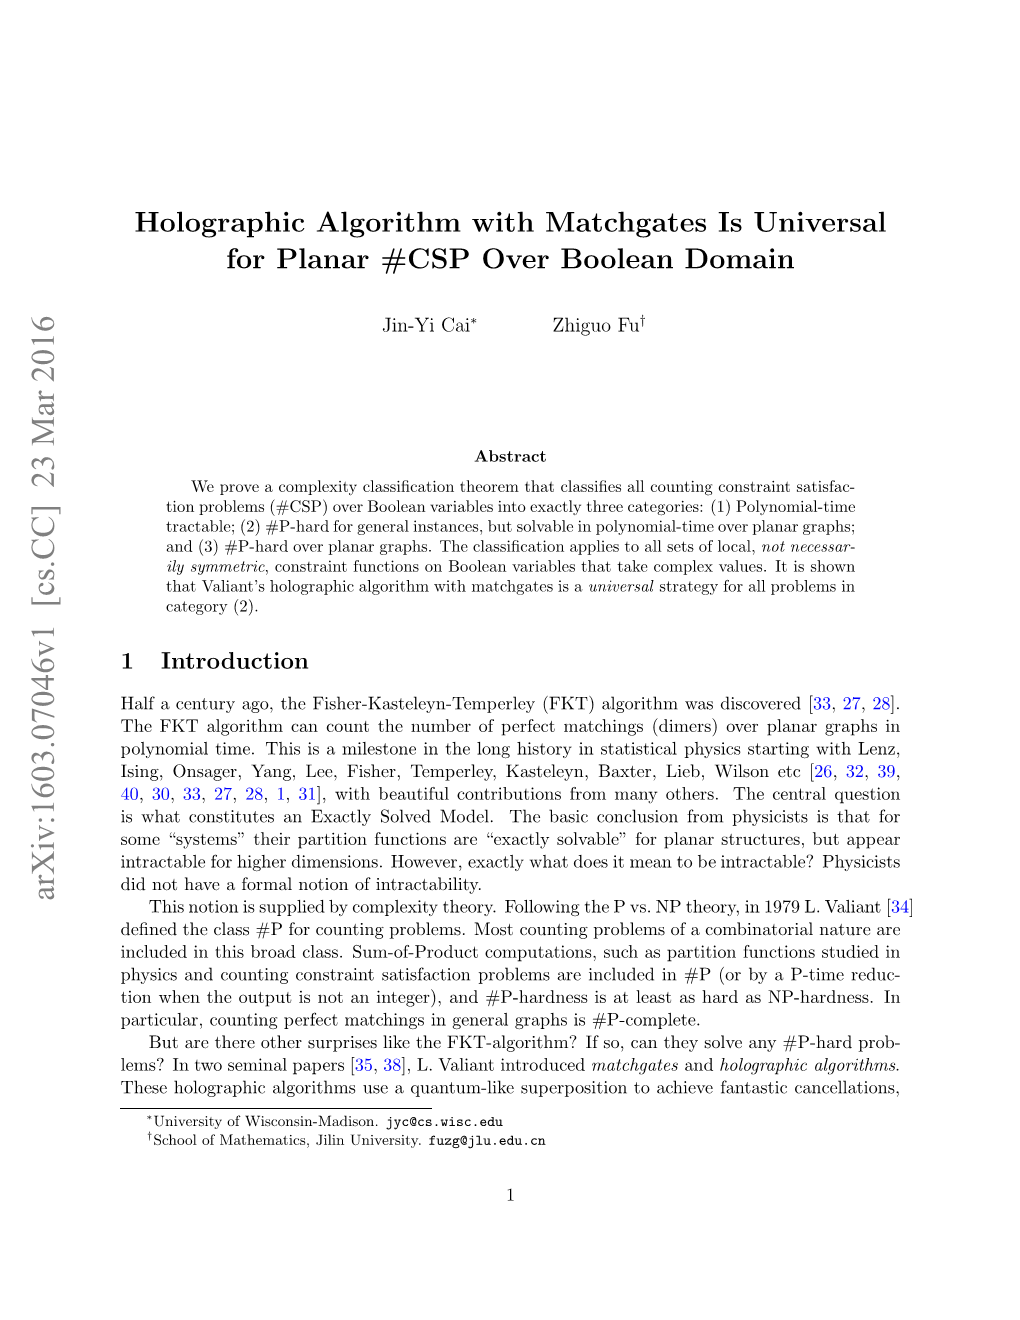 Holographic Algorithm with Matchgates Is Universal for Planar